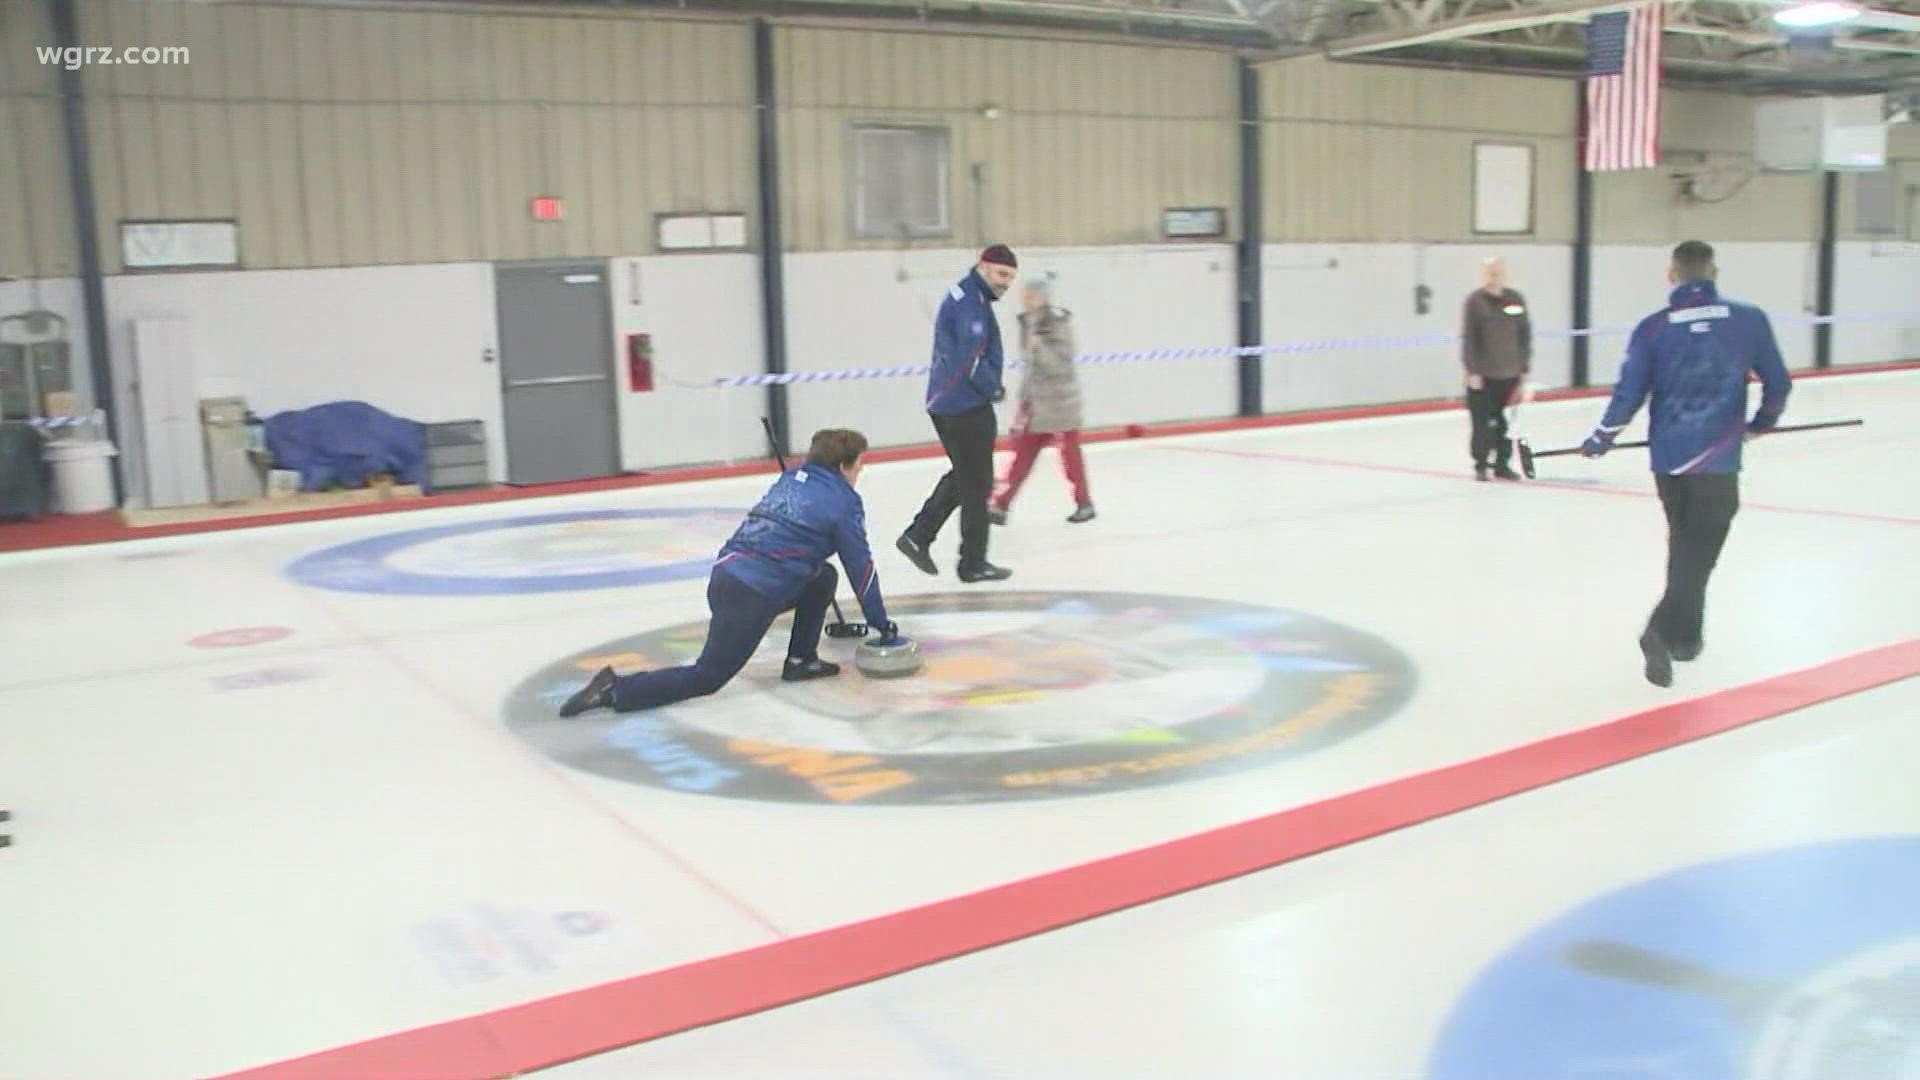 The Buffalo Curling Club will offer more Learn to Curl sessions in March.